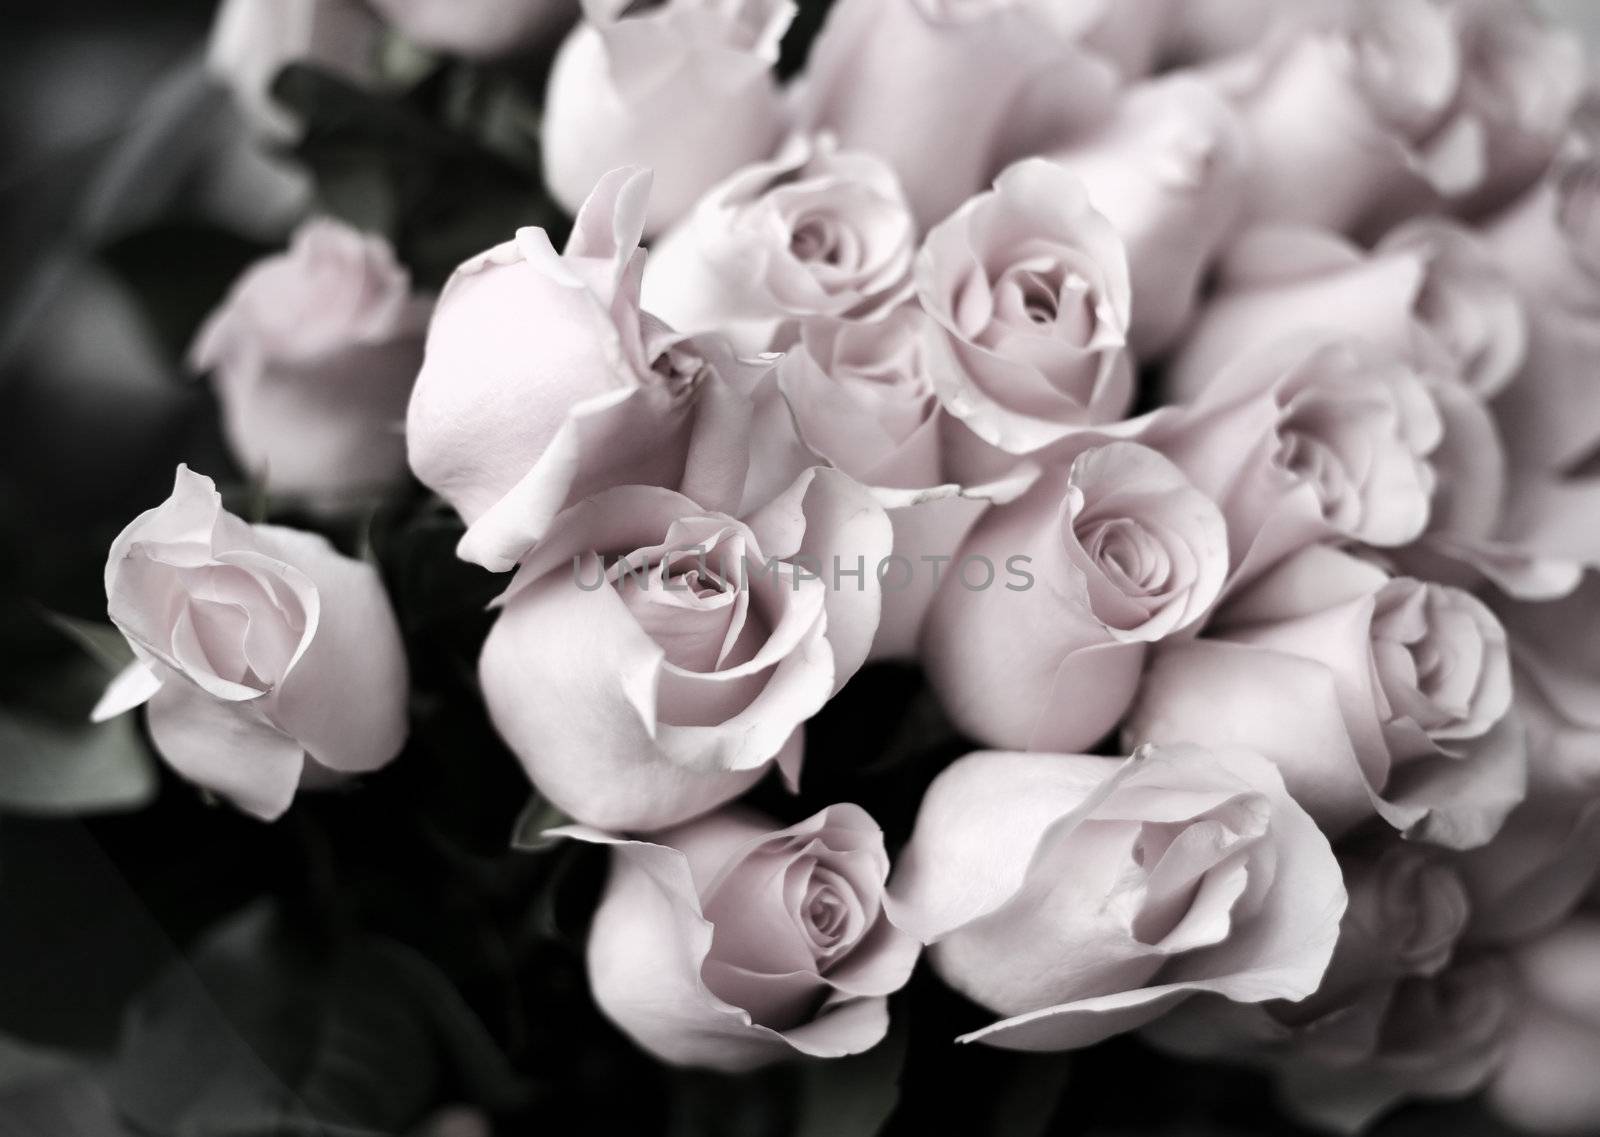 Bouquet from roses. b/w + pink tone